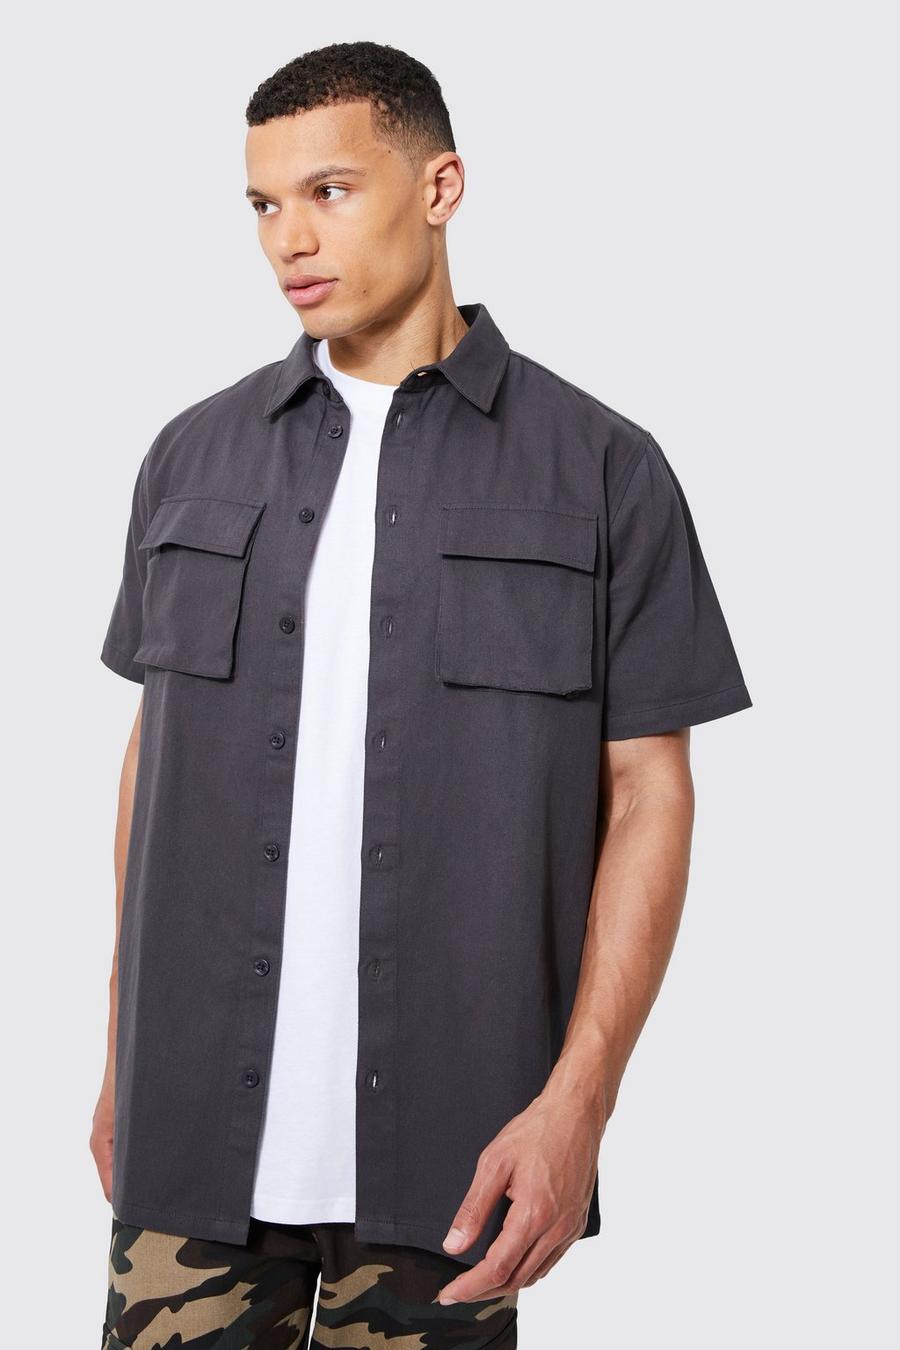 Tall - Chemise utilitaire à manches courtes, Charcoal grey